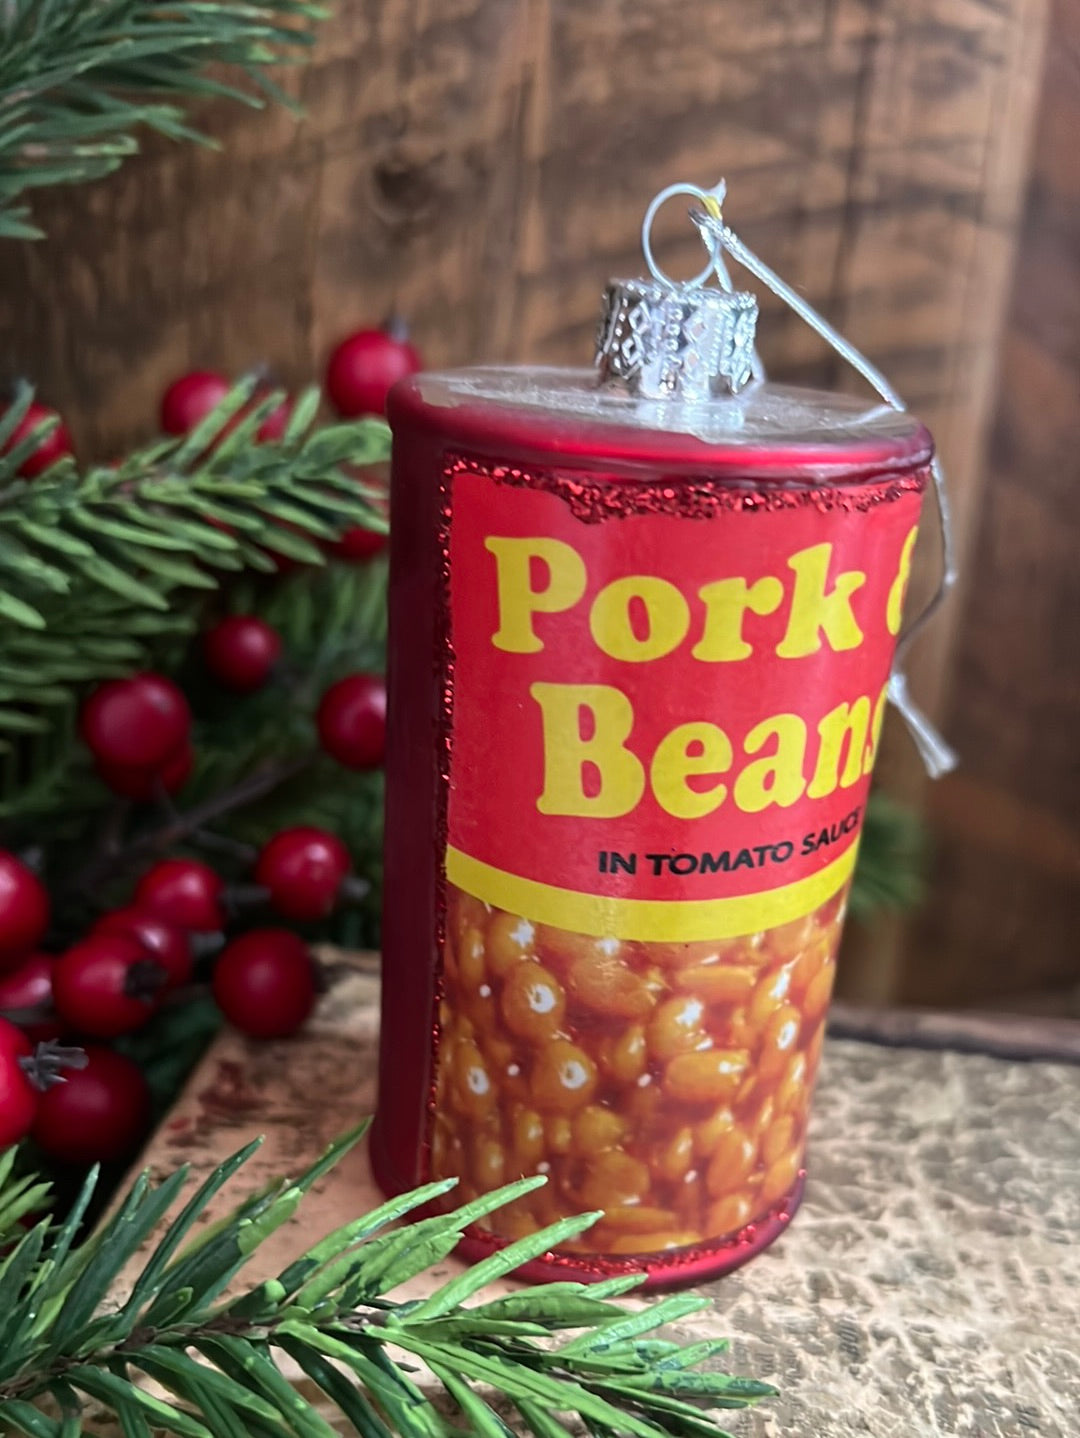 Can of Pork and Beans Glass and Glitter Ornament